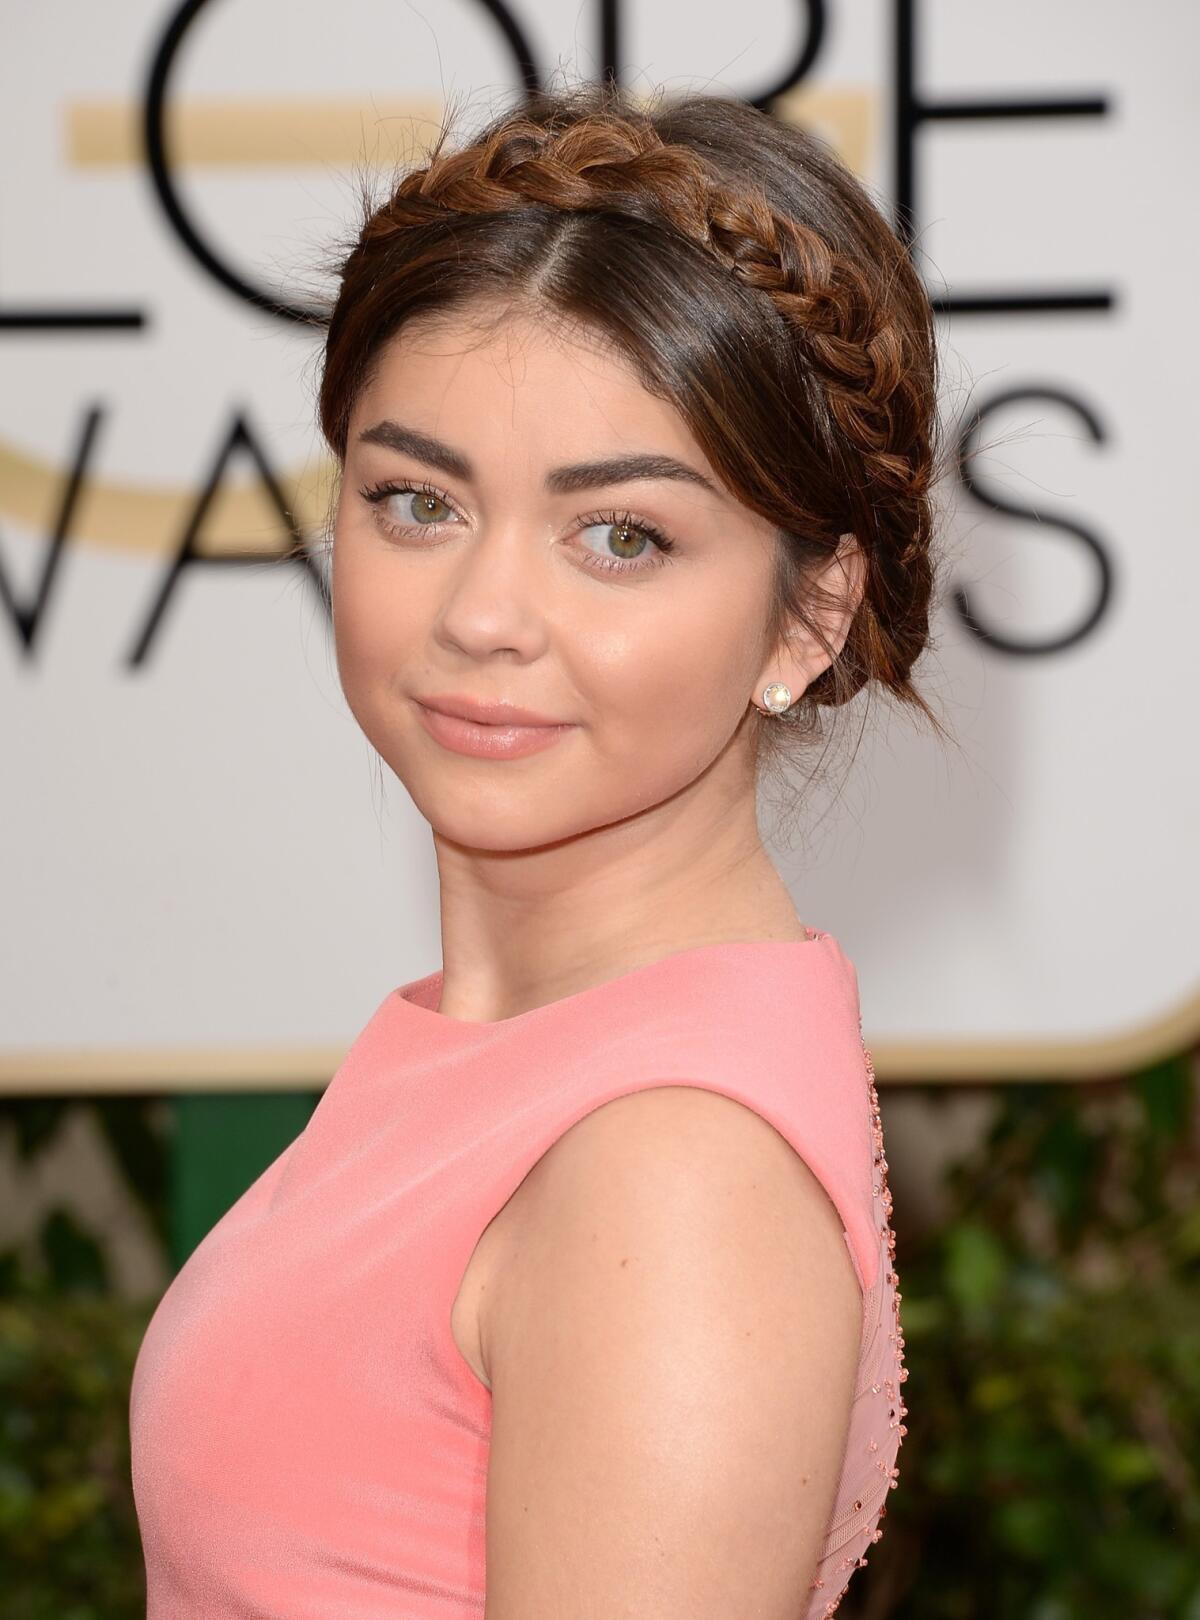 "Modern Family" actress Sarah Hyland wears her hair in a crown braid to Sunday's Golden Globes.